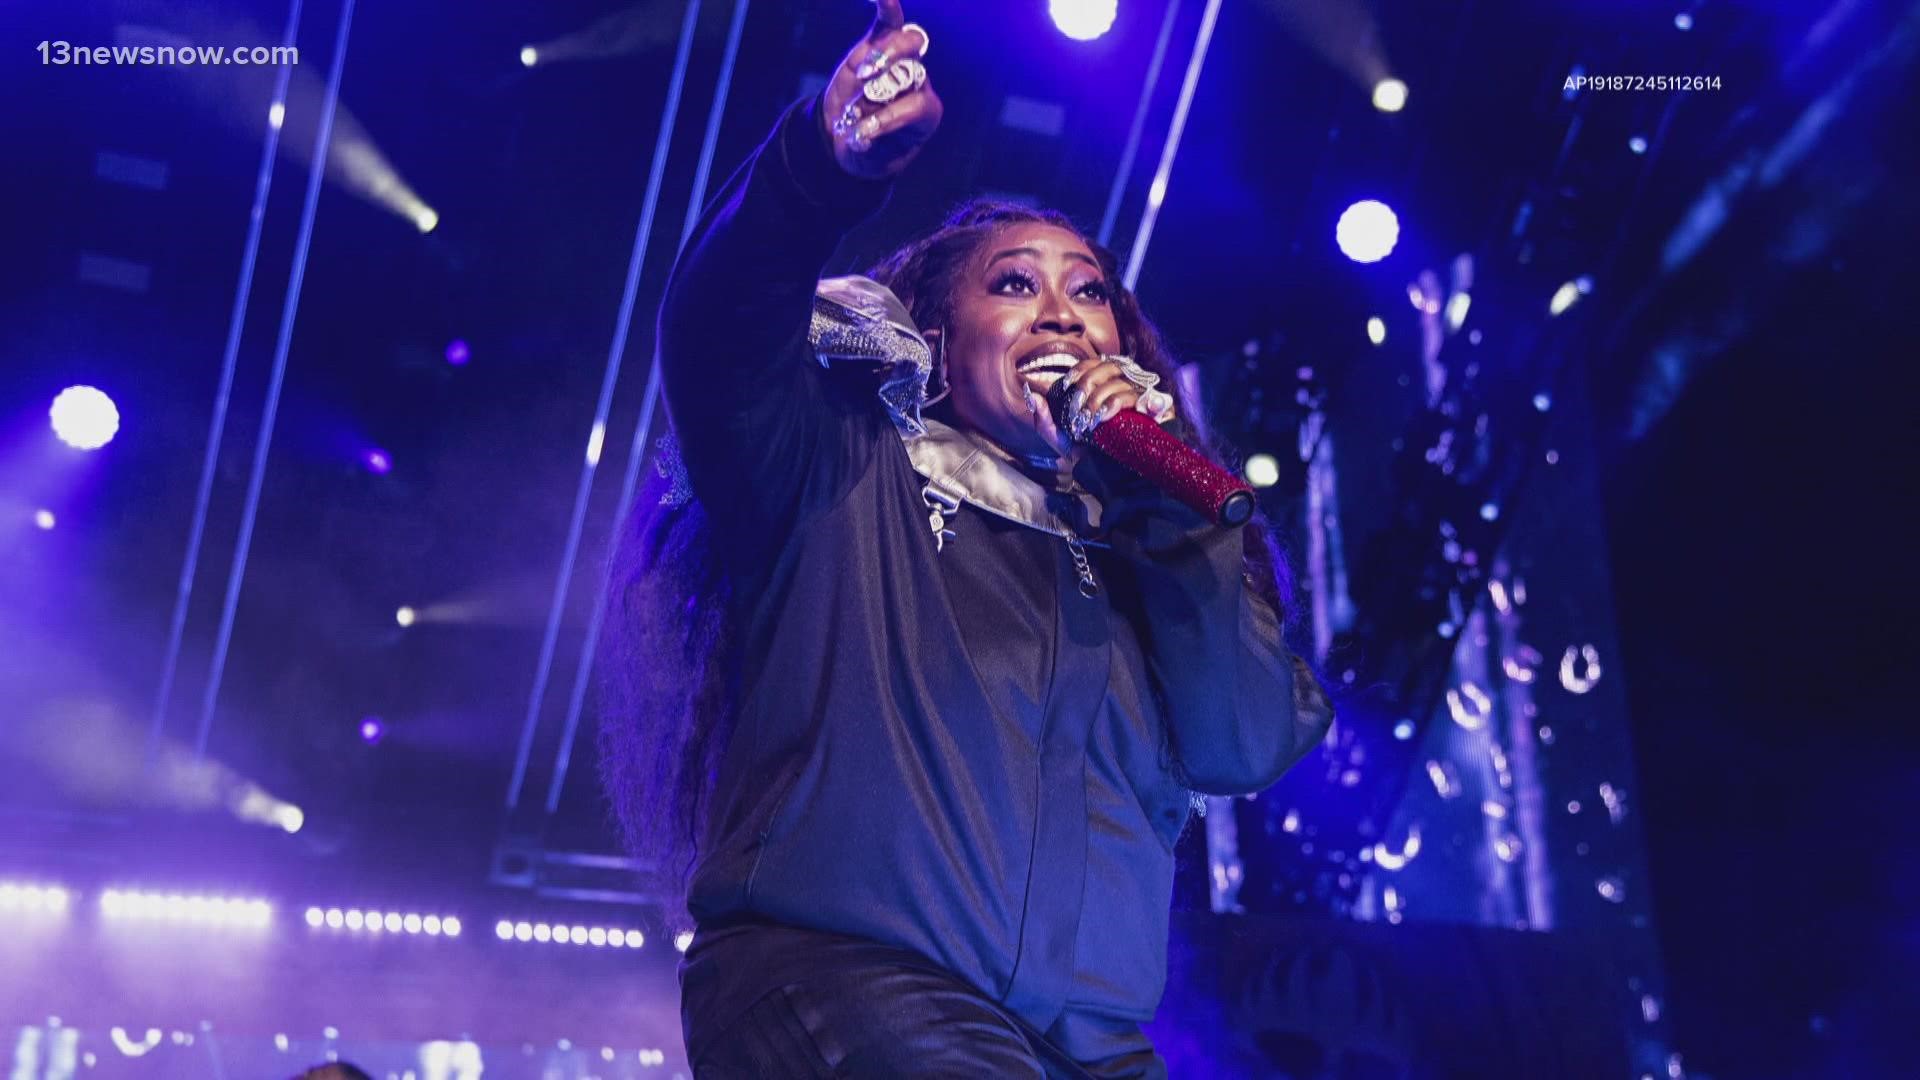 Vice Mayor De'Andre Barnes announced Wednesday that the music legend will return to her hometown to celebrate "Missy Elliott Boulevard."